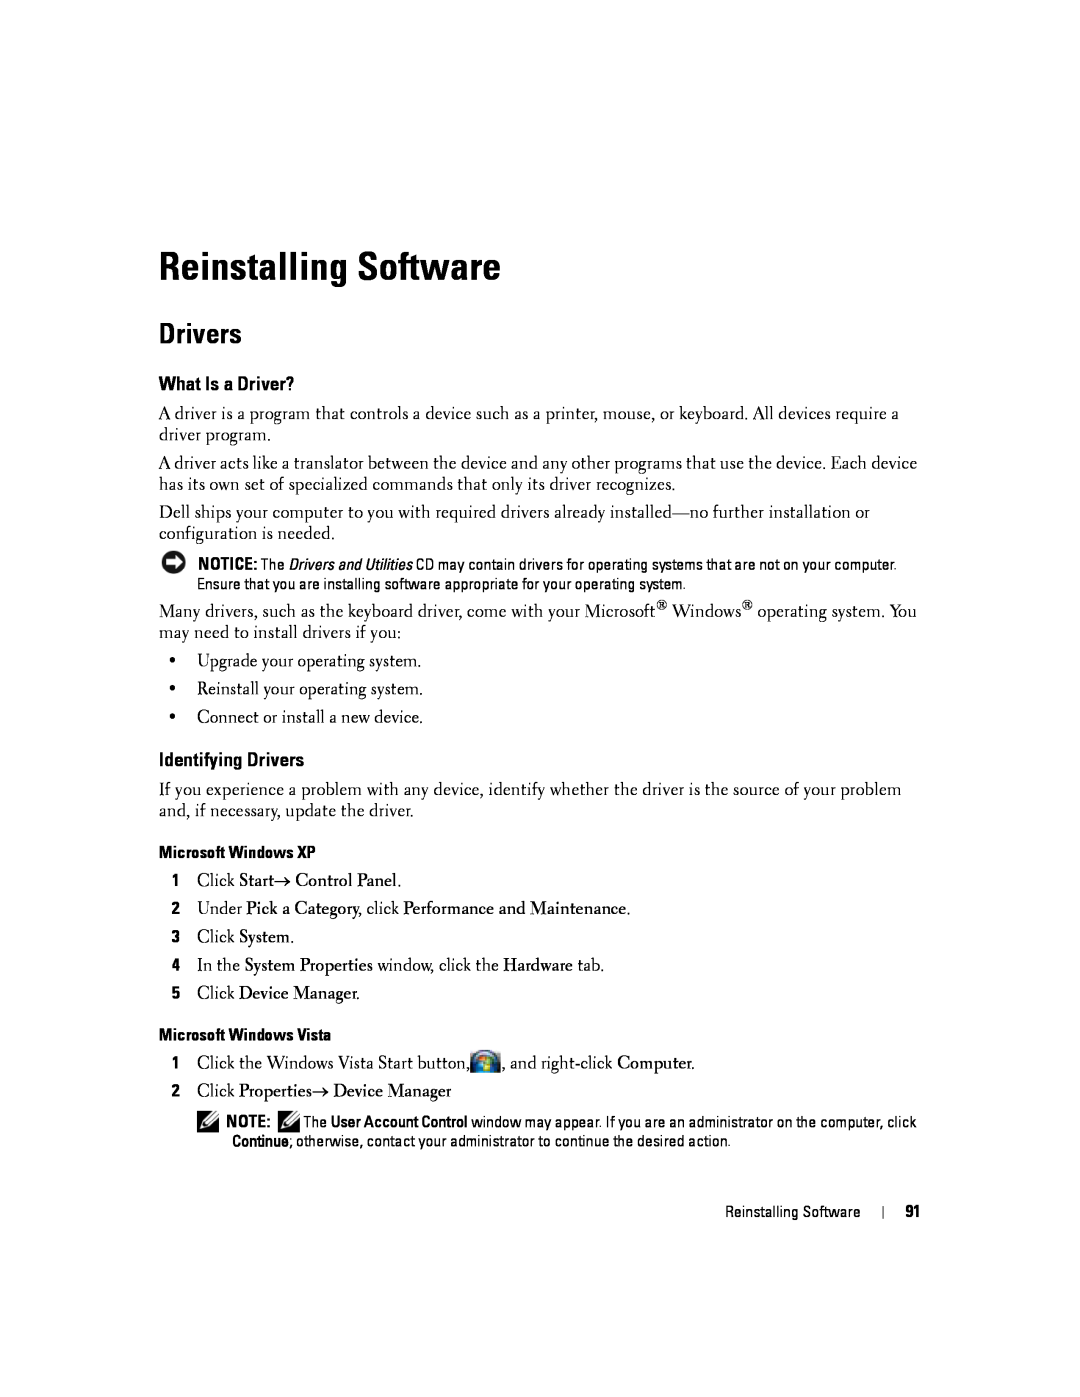 Dell D830 Reinstalling Software, What Is a Driver?, Identifying Drivers, Microsoft Windows XP, Microsoft Windows Vista 